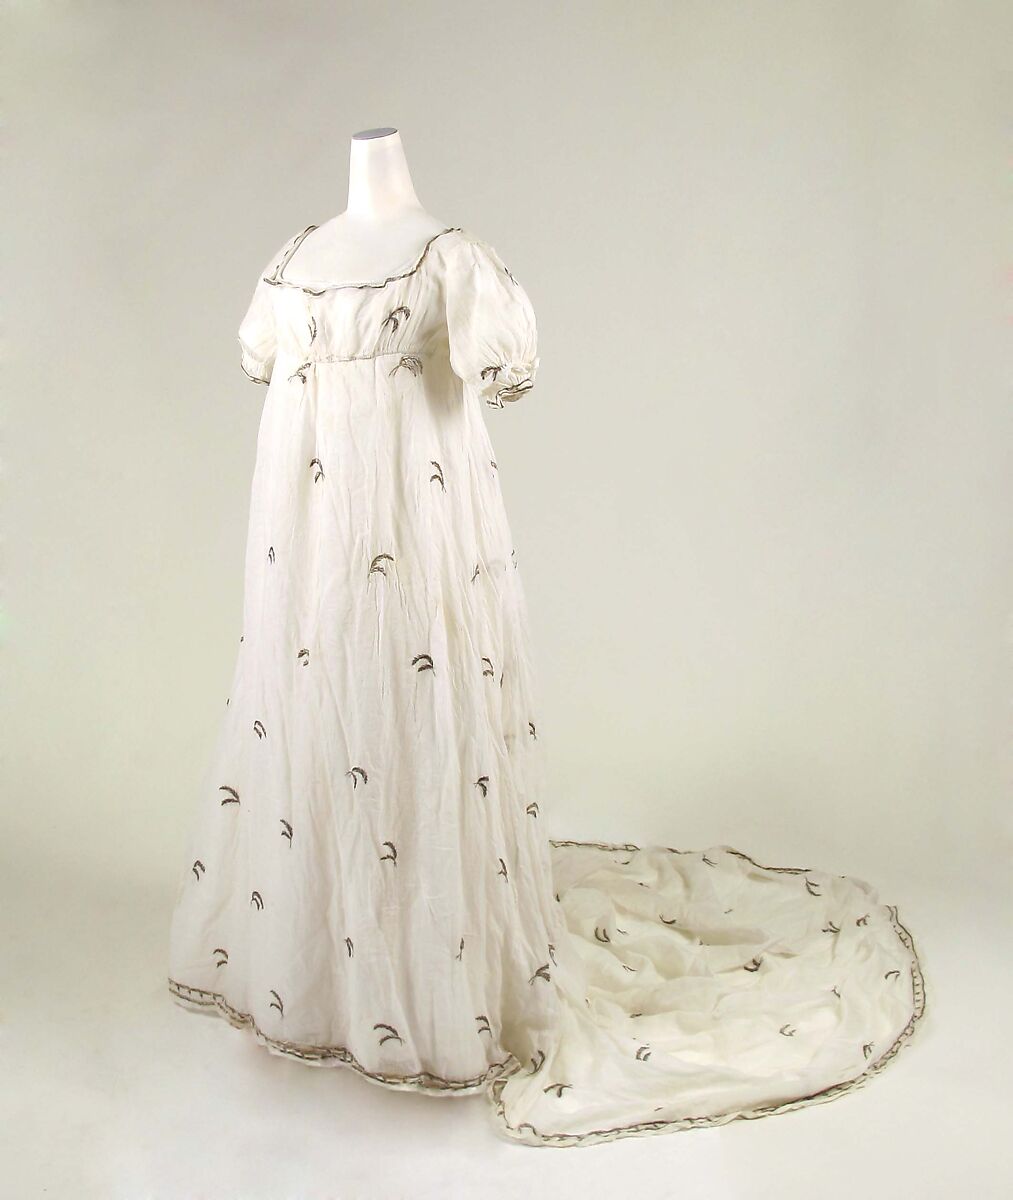 Dress, cotton, silver, probably French 